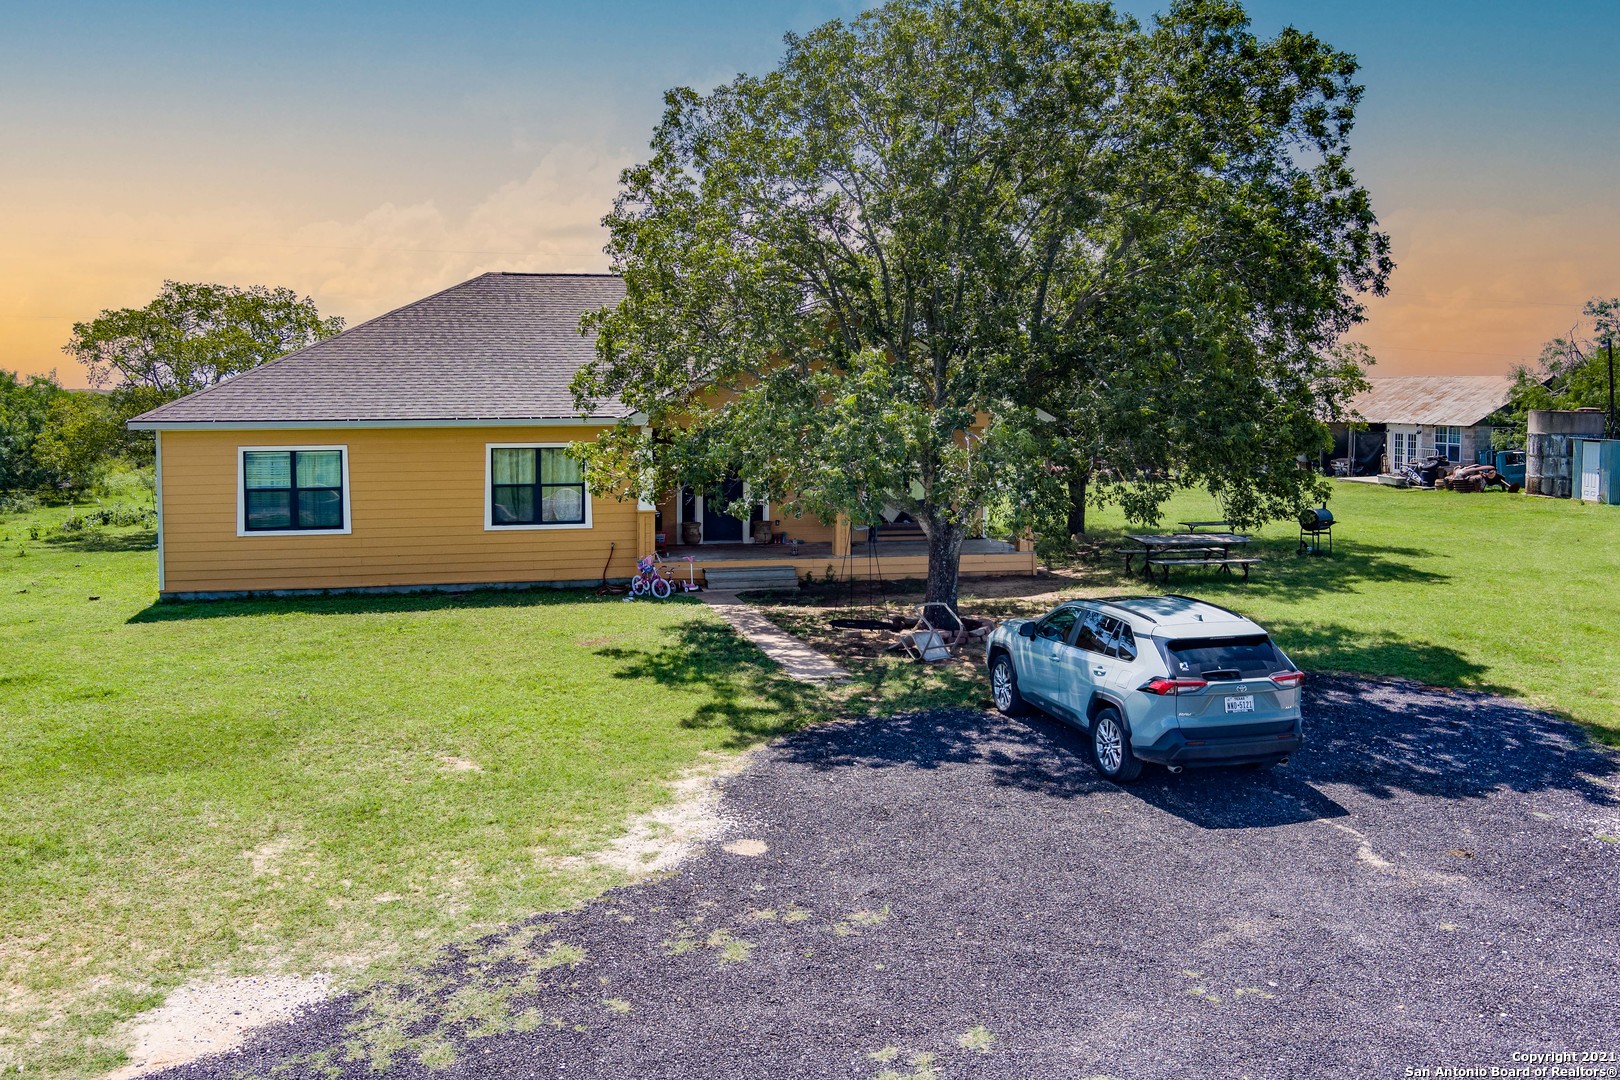 Beautiful home on 20 acres, minutes from the middle of San Antonio so you have the advantage of running your business at your home. Always a breeze, no flood zone, out buildings include 1 area for a man cave or working on your favorite vehicle, covered work area with electric and water perfect for your own welding shop.